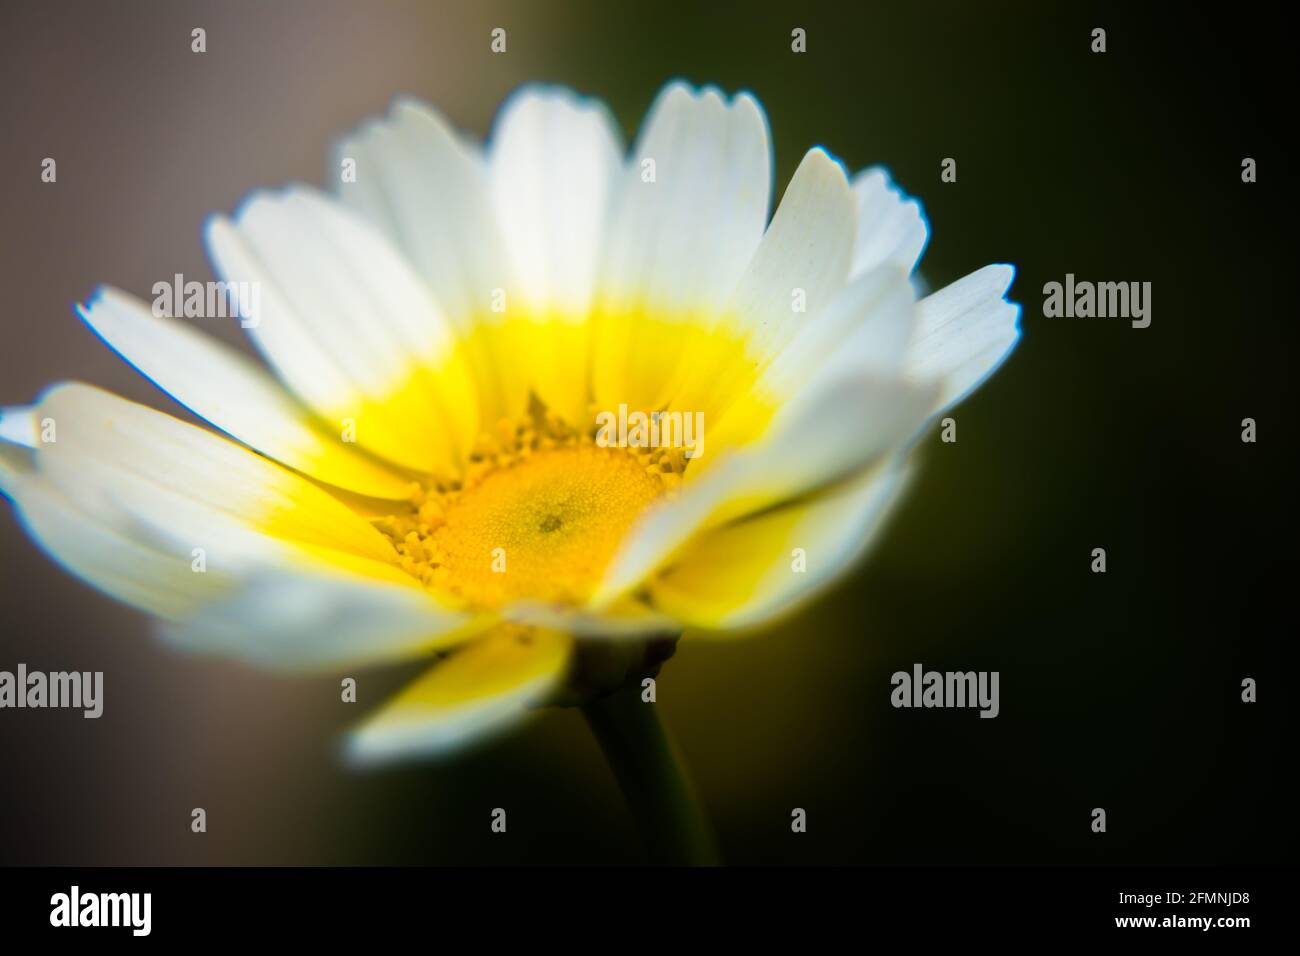 White Mexican sunflower weed (Tithonia diversifolia). Flower of yellow petals with selective focus. Stock Photo